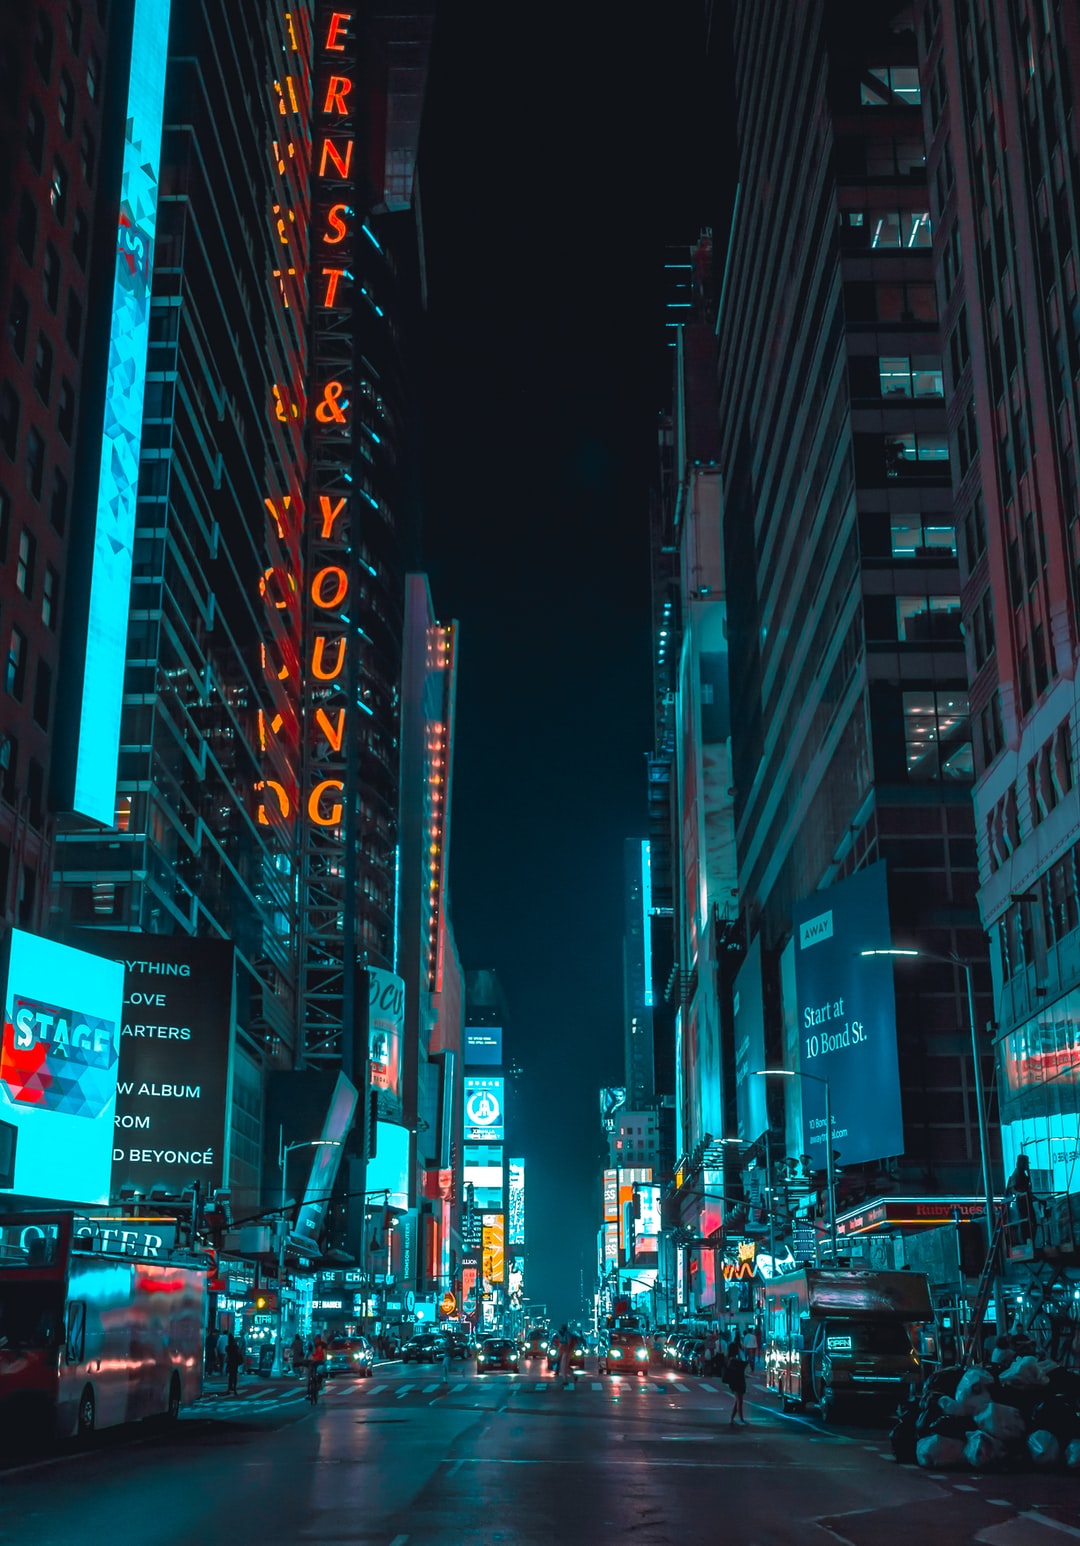 Aesthetic Nyc Wallpapers